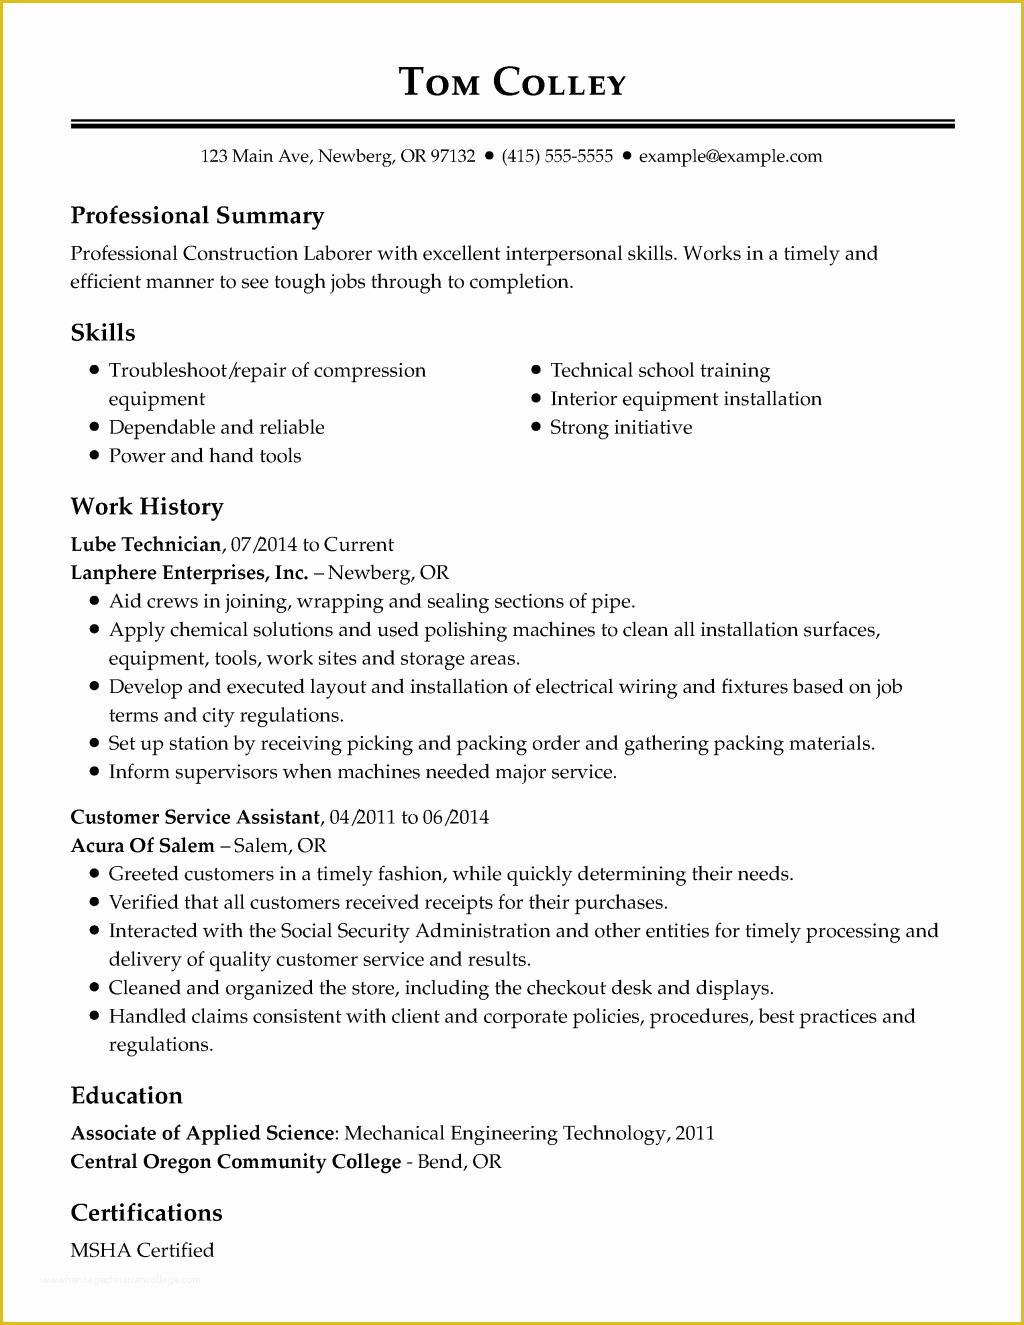 Basic Resume Template Download Free Of Resume and Template First Job Resume Builder Best and